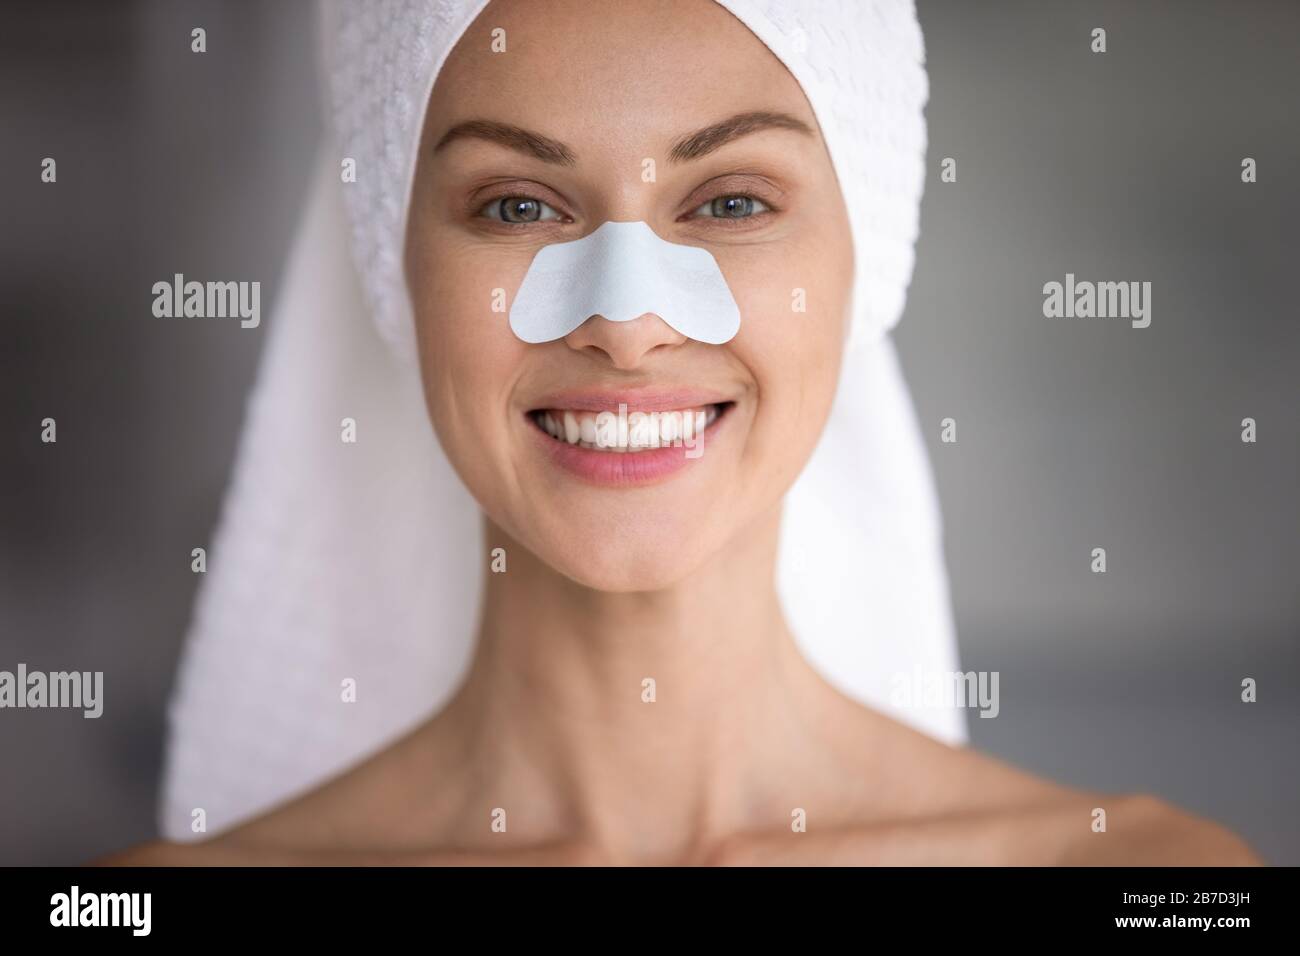 Happy lady with cleansing strip on nose looking at camera. Stock Photo